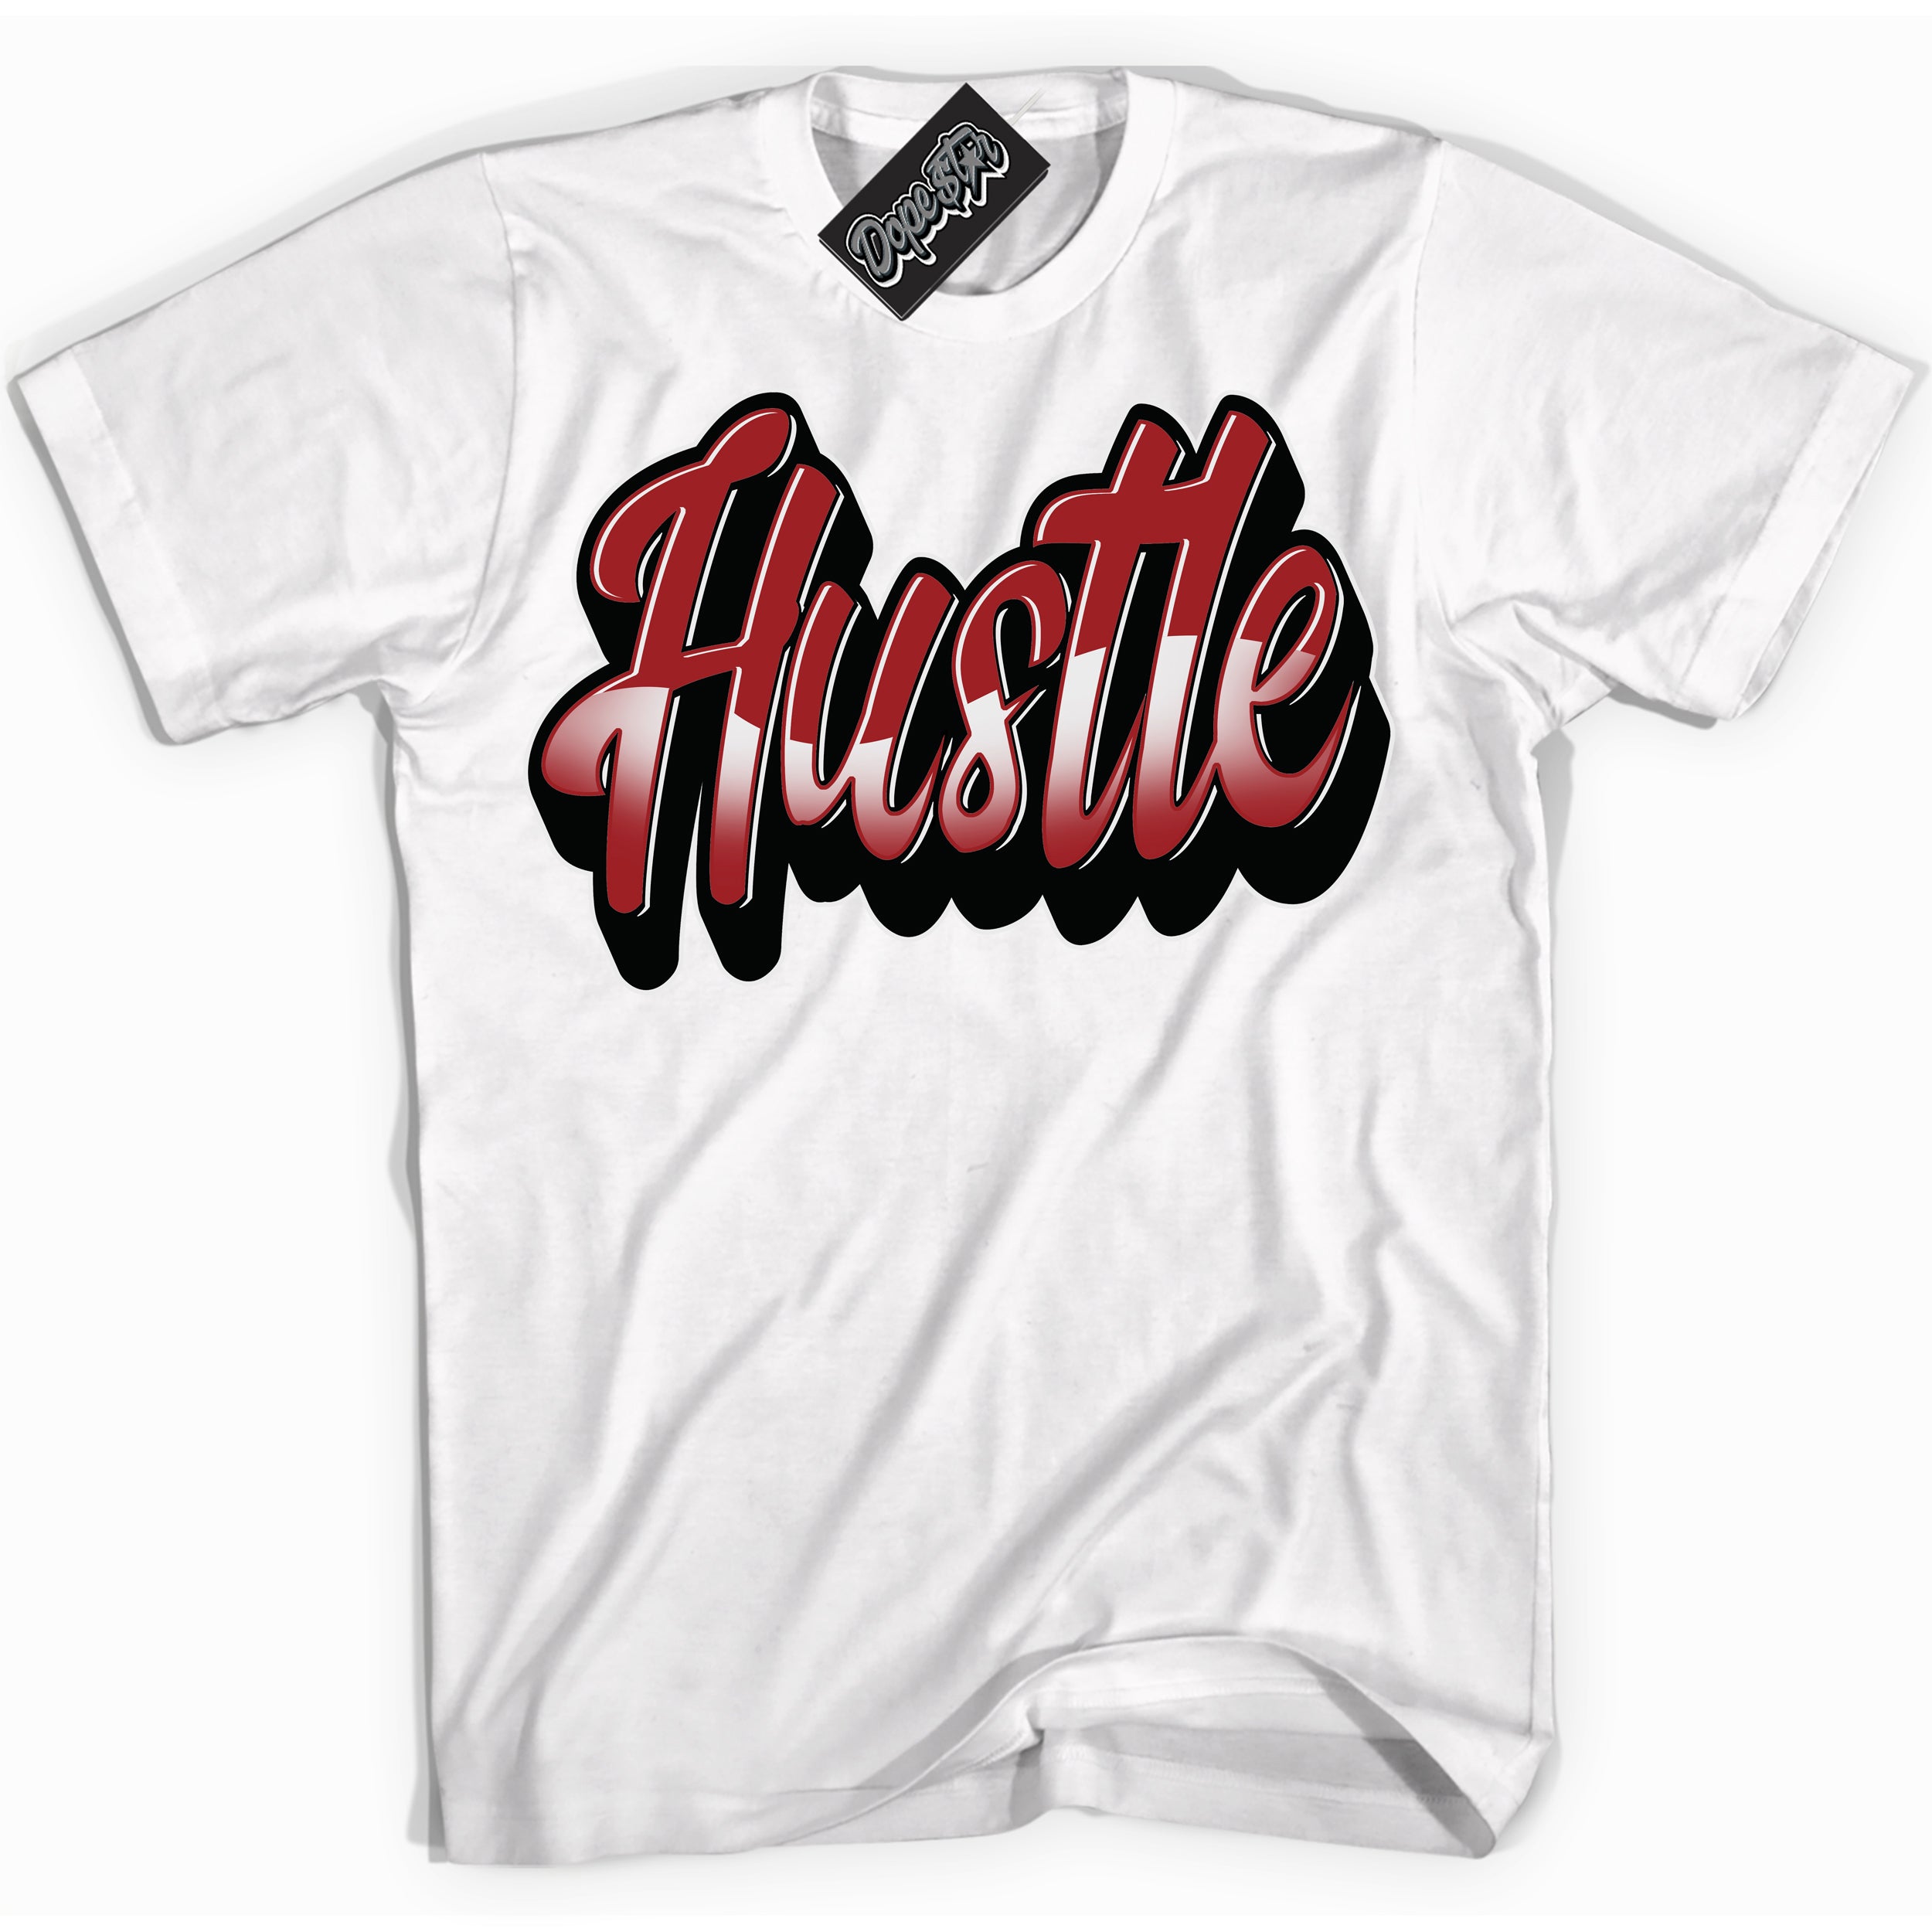 Cool White graphic tee with “ Hustle 2 ” print, that perfectly matches Lost And Found 1s sneakers 